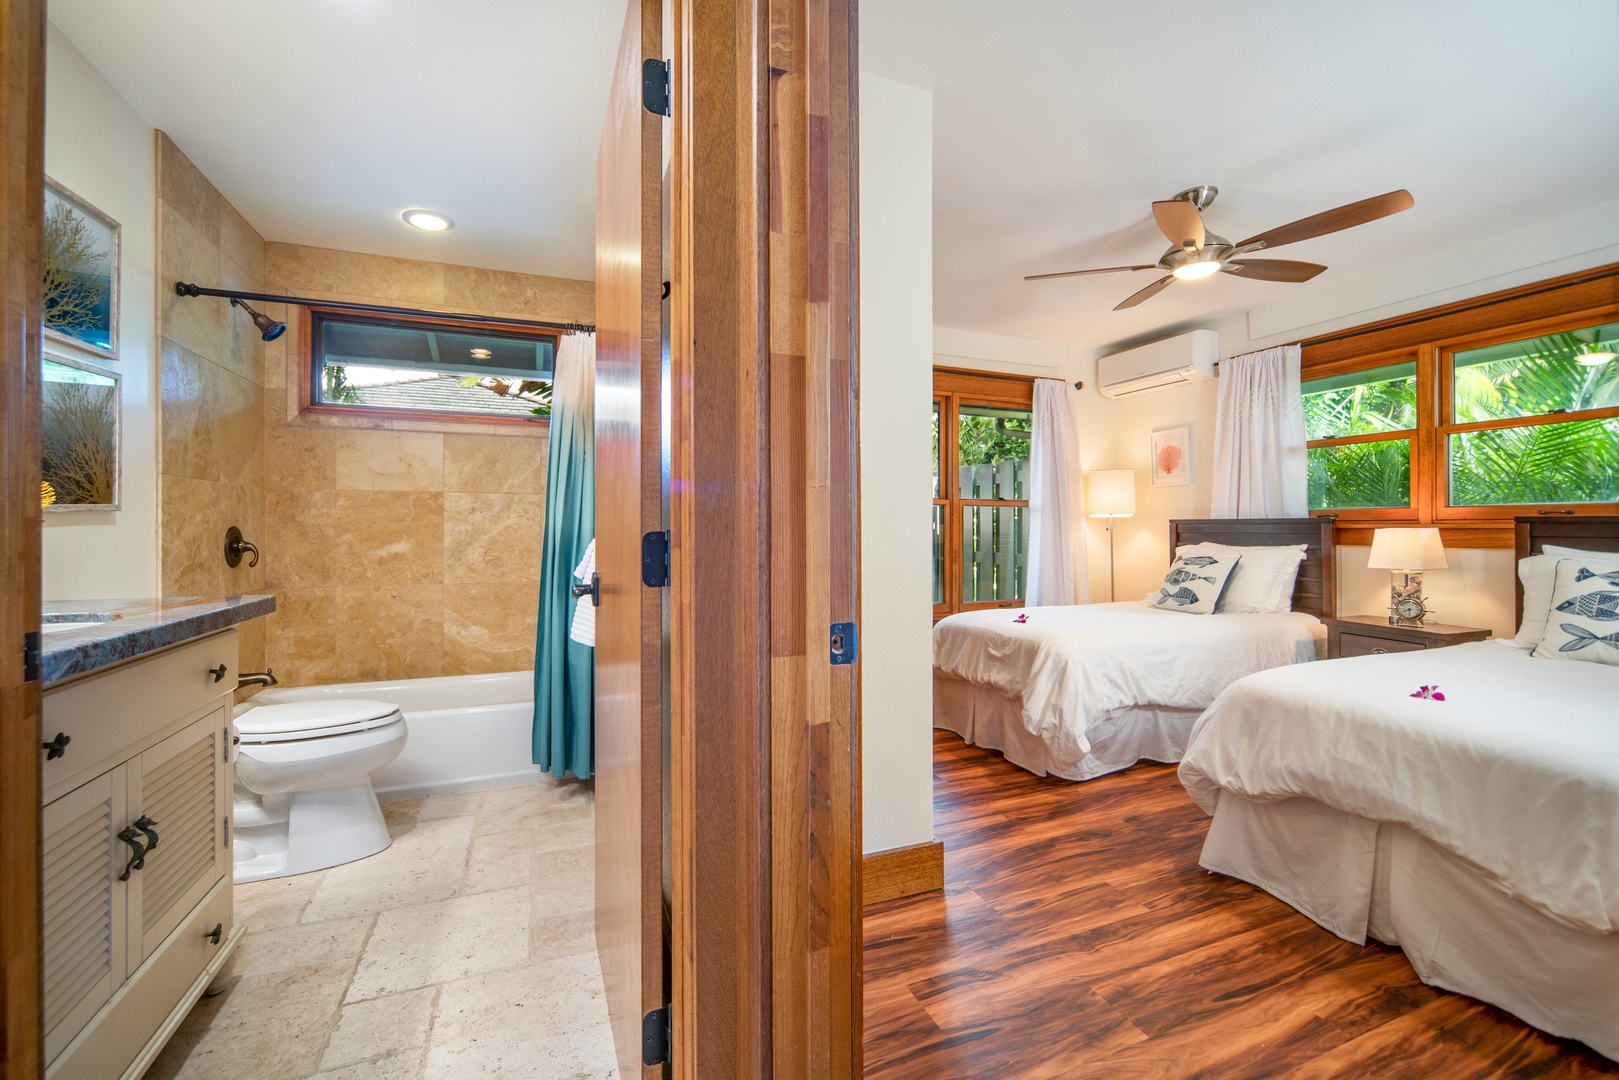 Honolulu Vacation Rentals, Hale Niuiki - A view from the living room into the twin bedroom and hallway bathroom.